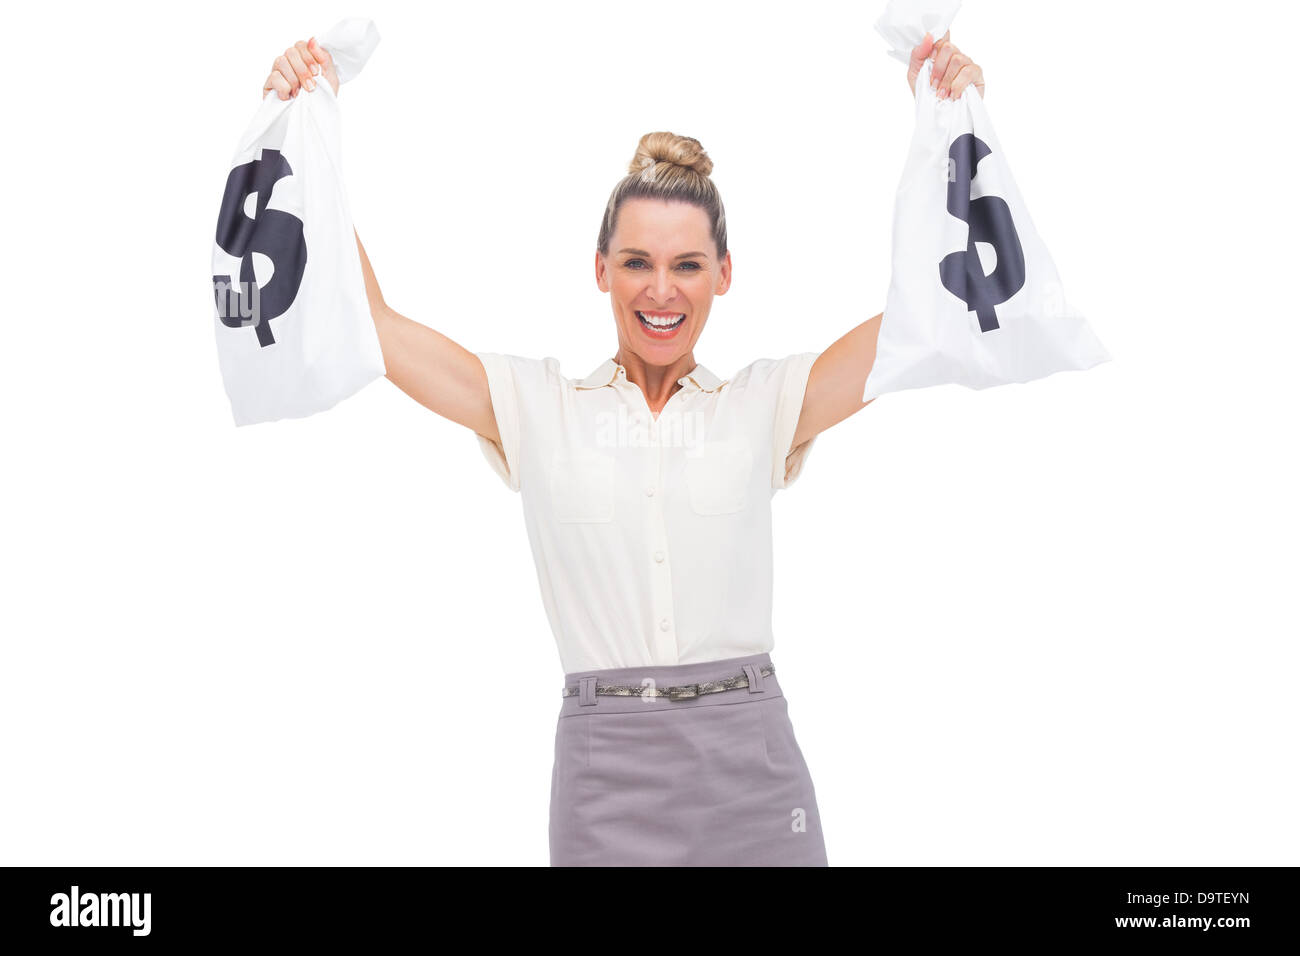 Smiling businesswoman showing money bags Stock Photo